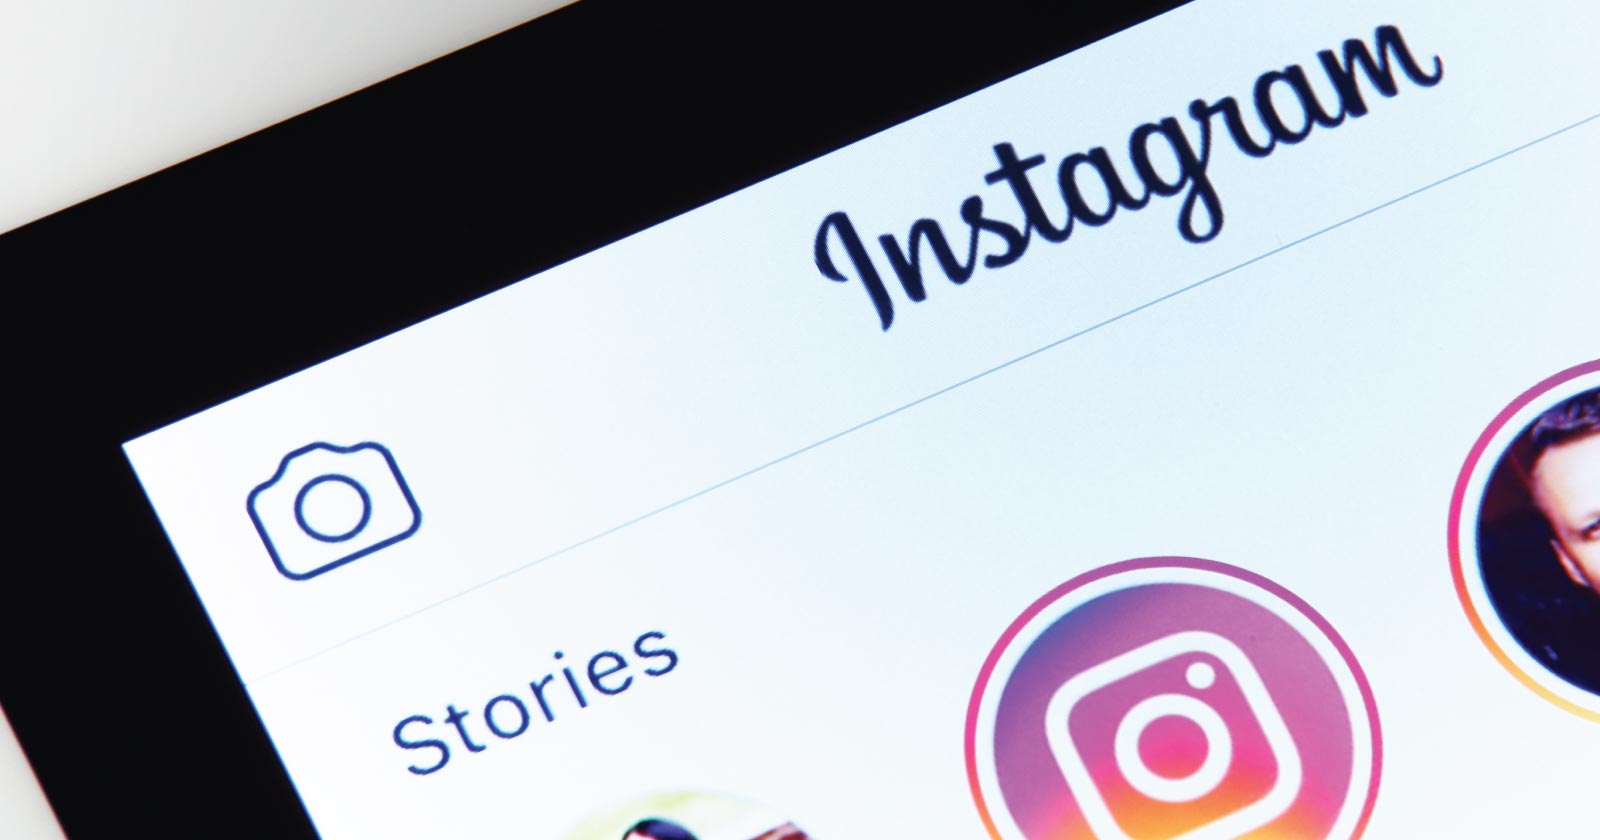 How To Get Instagram Followers (Without Being Spammy)